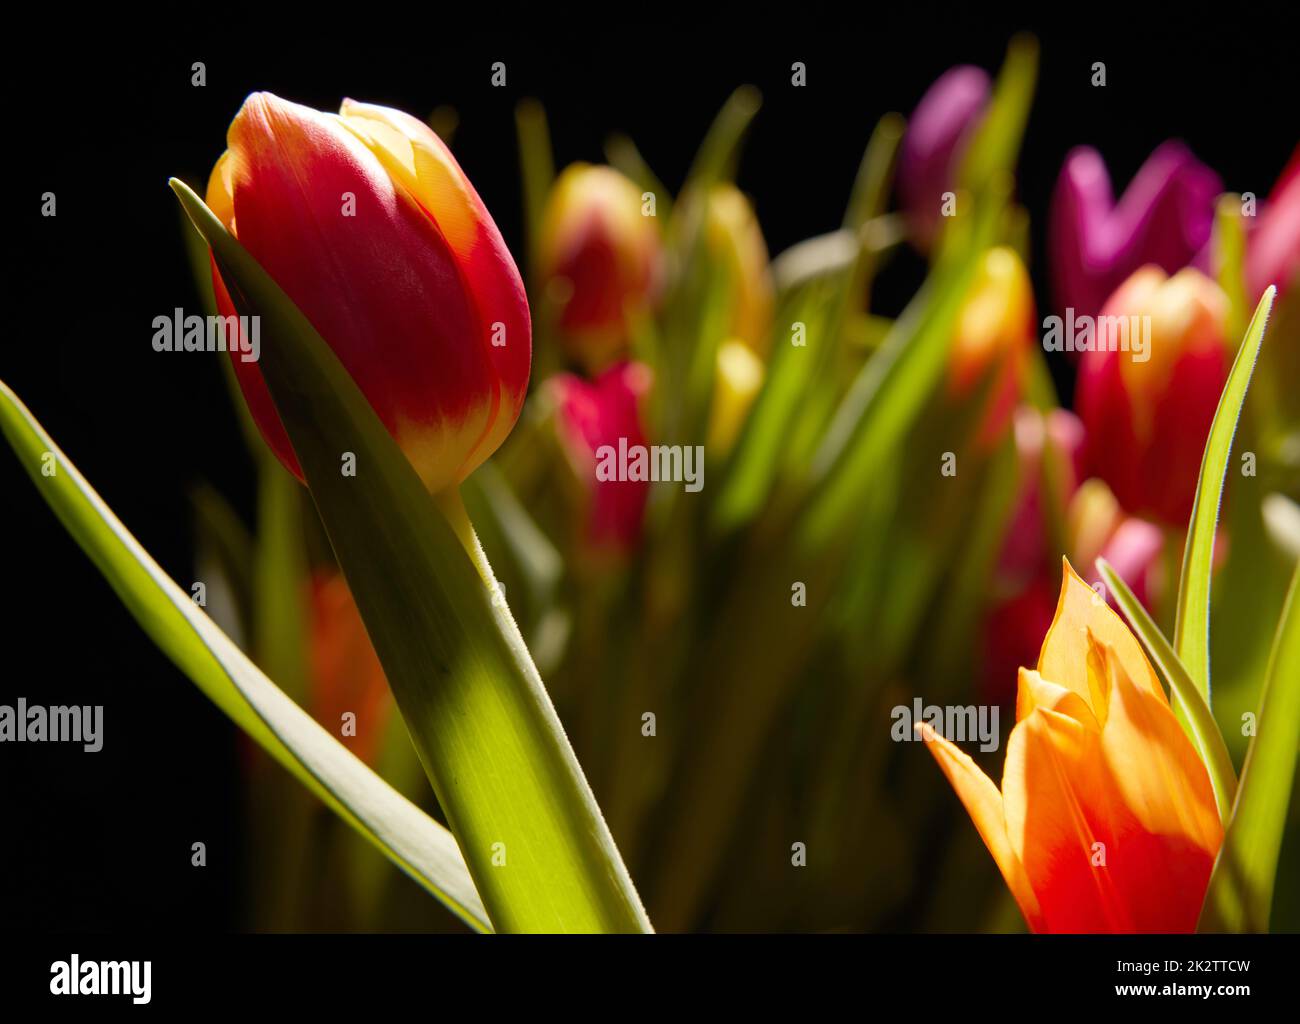 Blooming tulips with colorful petals Stock Photo